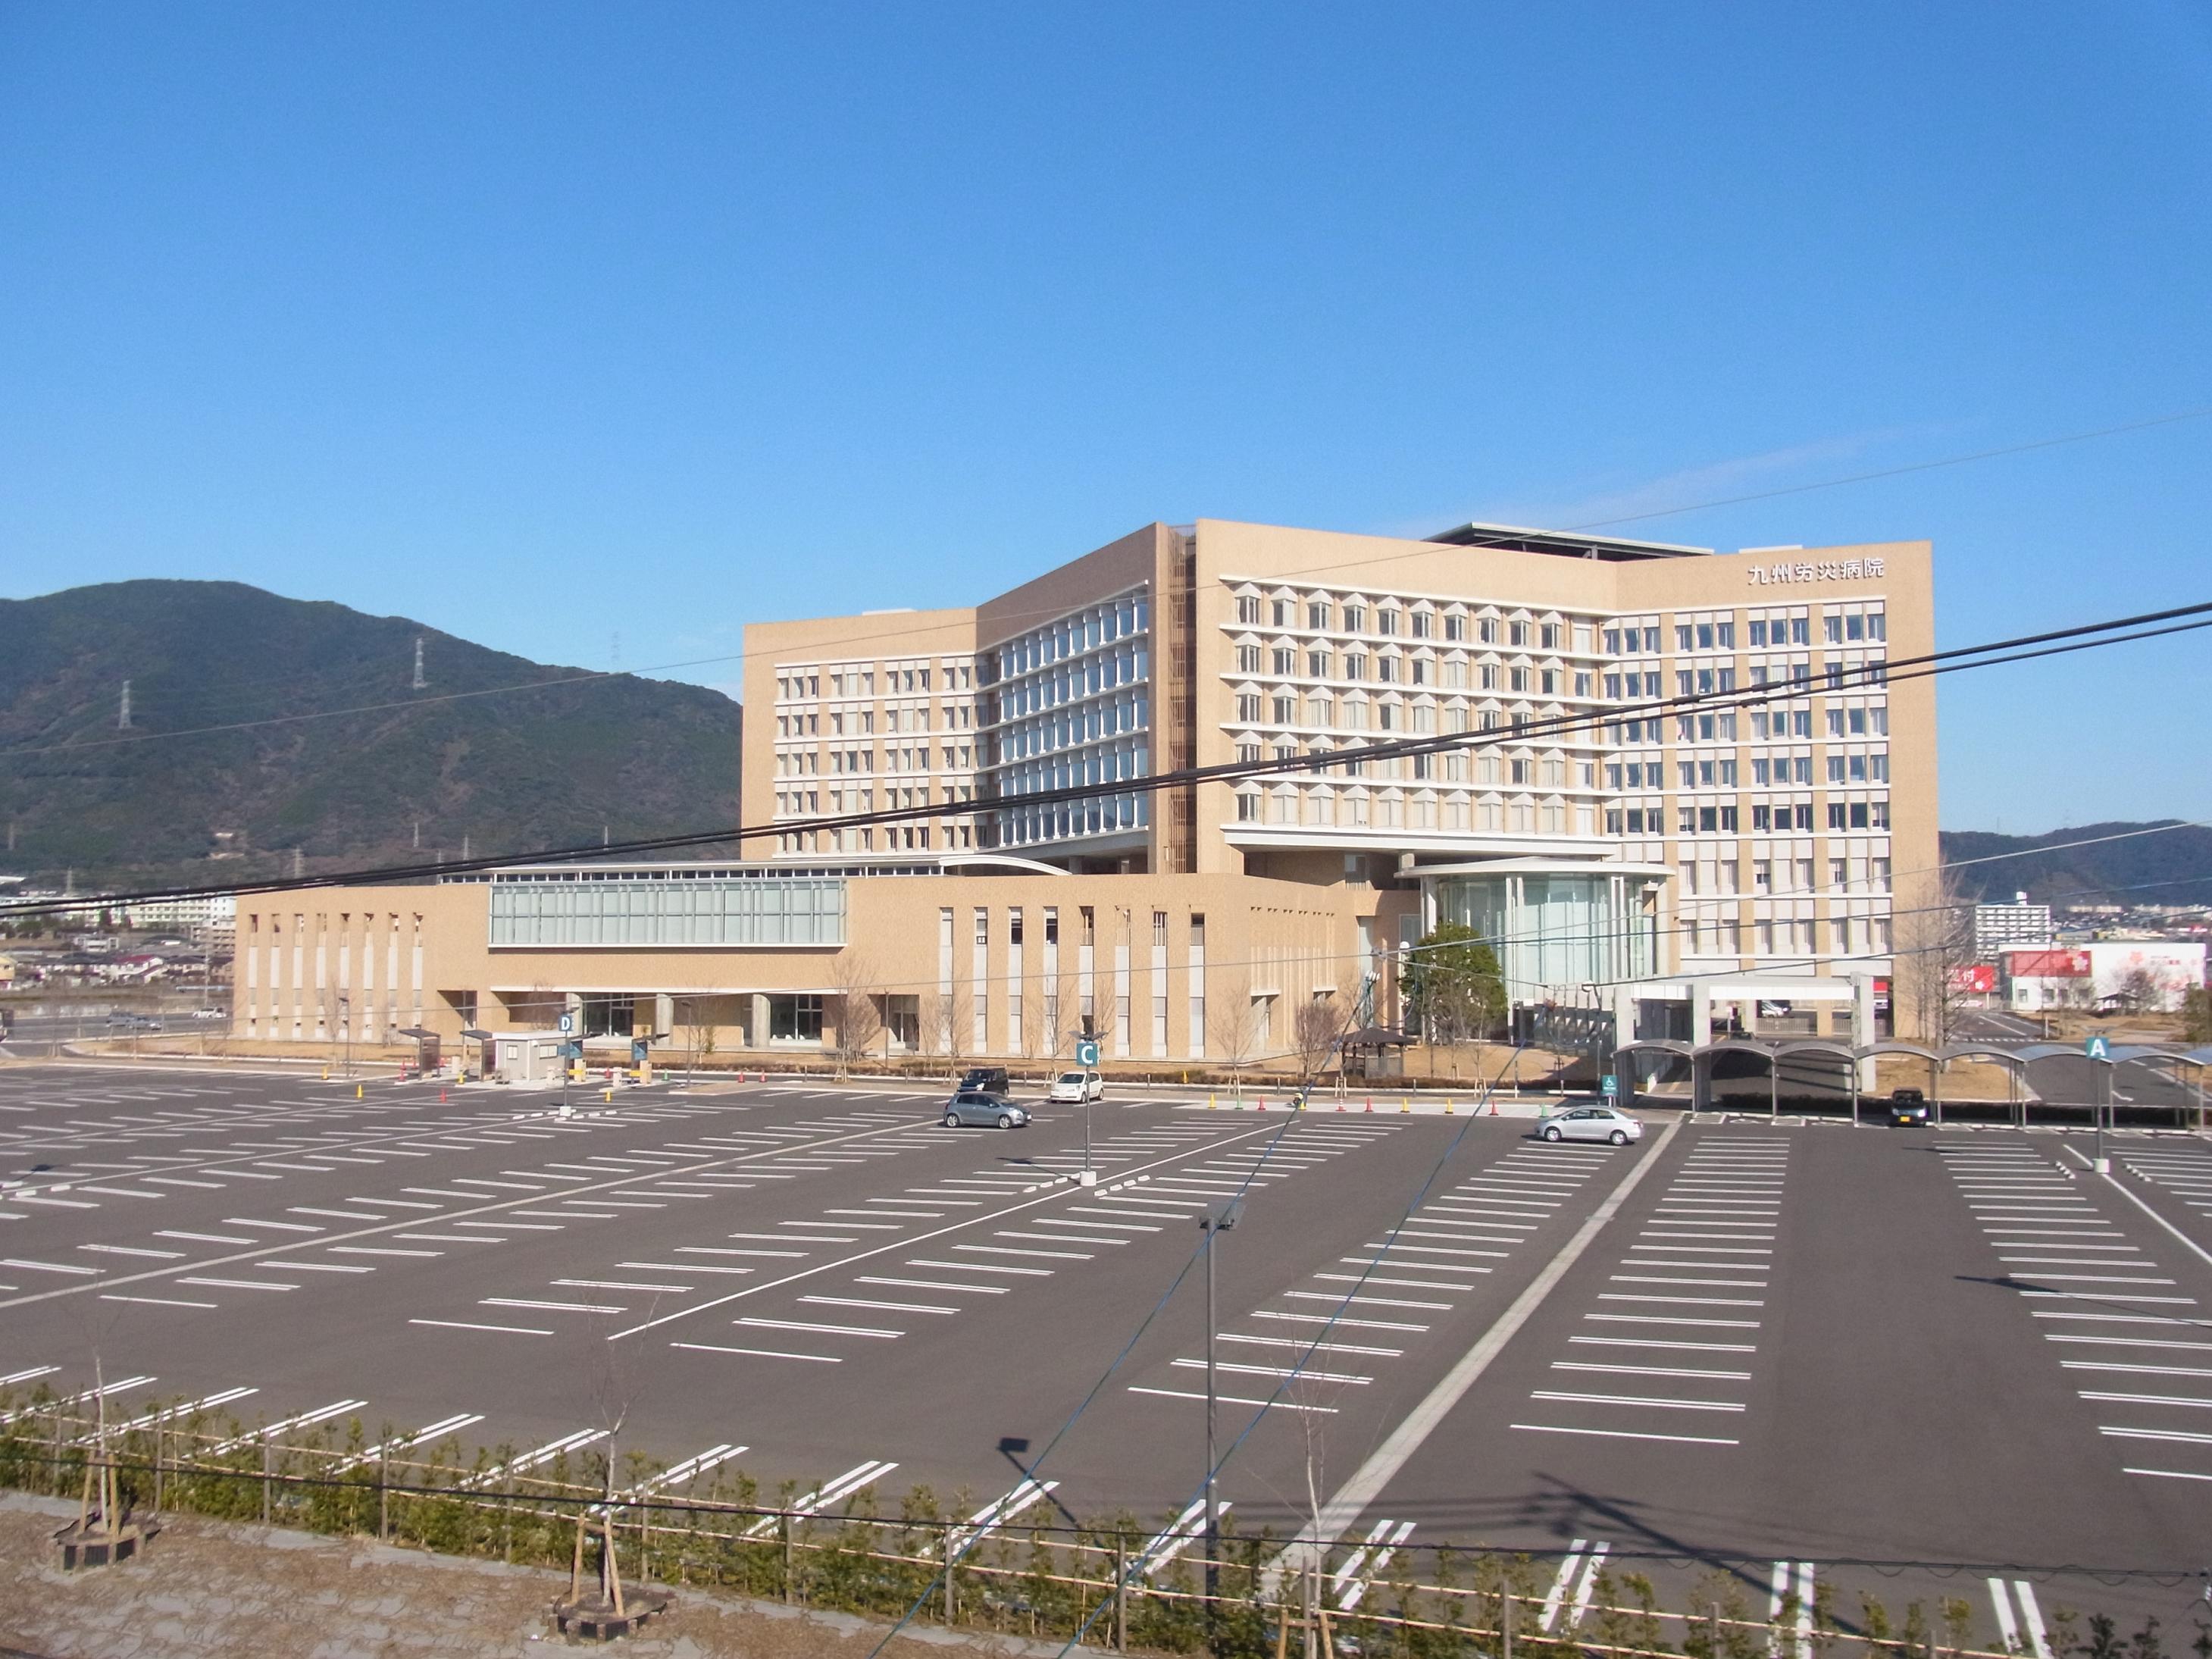 Hospital. 1029m to the National Institute of Labor Health and Welfare Organization Kyushurosaibyoin (hospital)